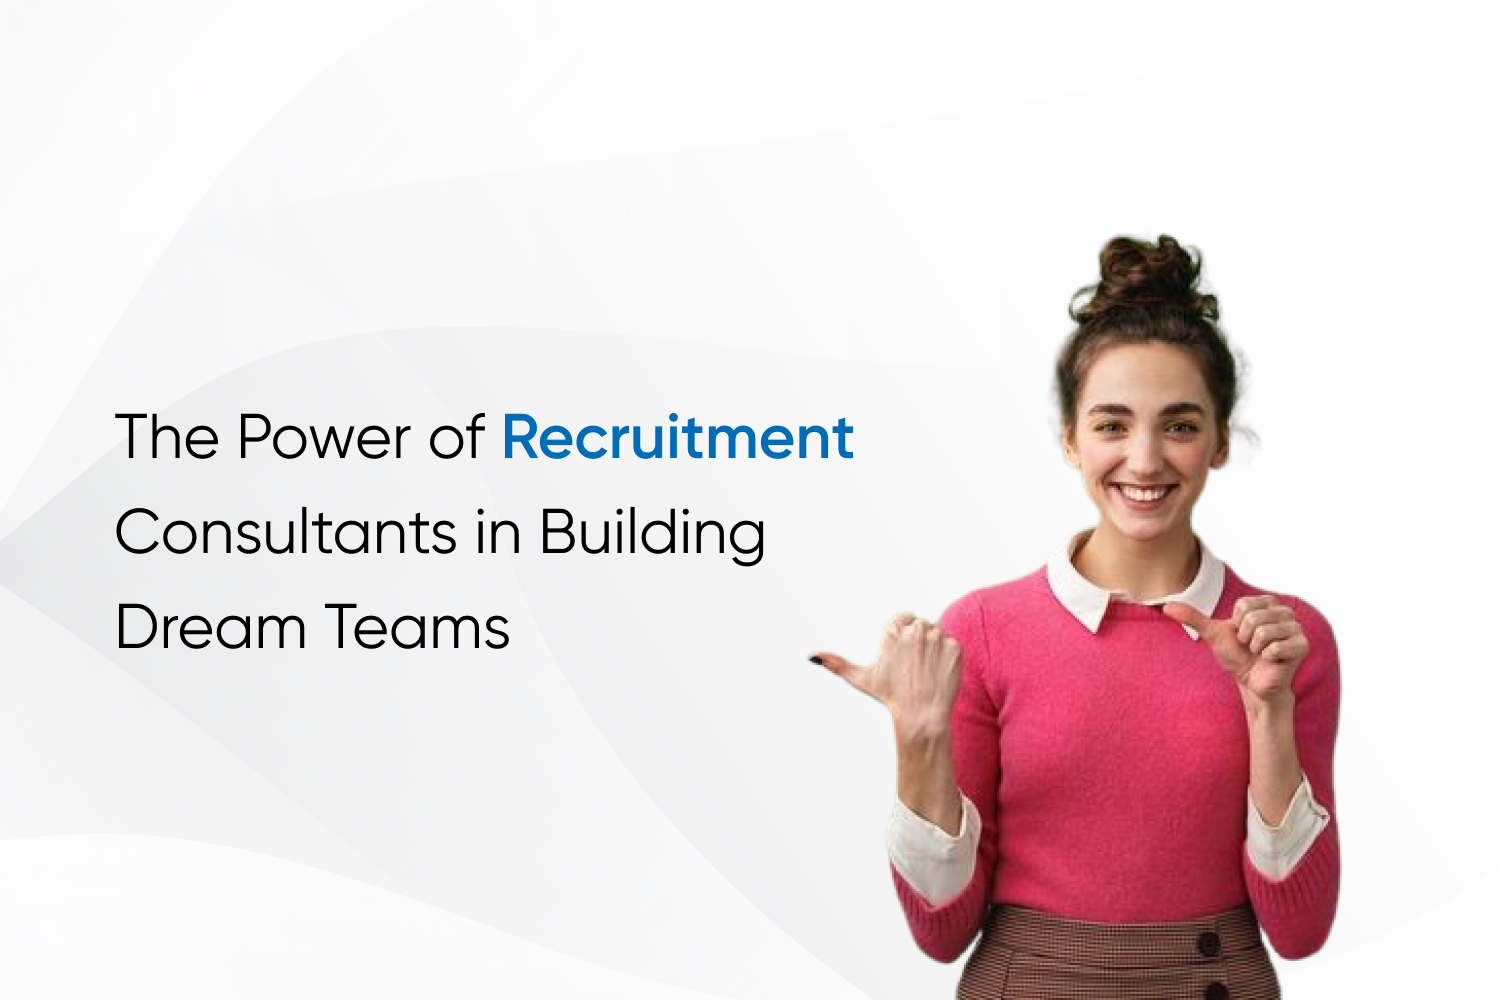 The Power of Recruitment Consultants in Building Dream Teams